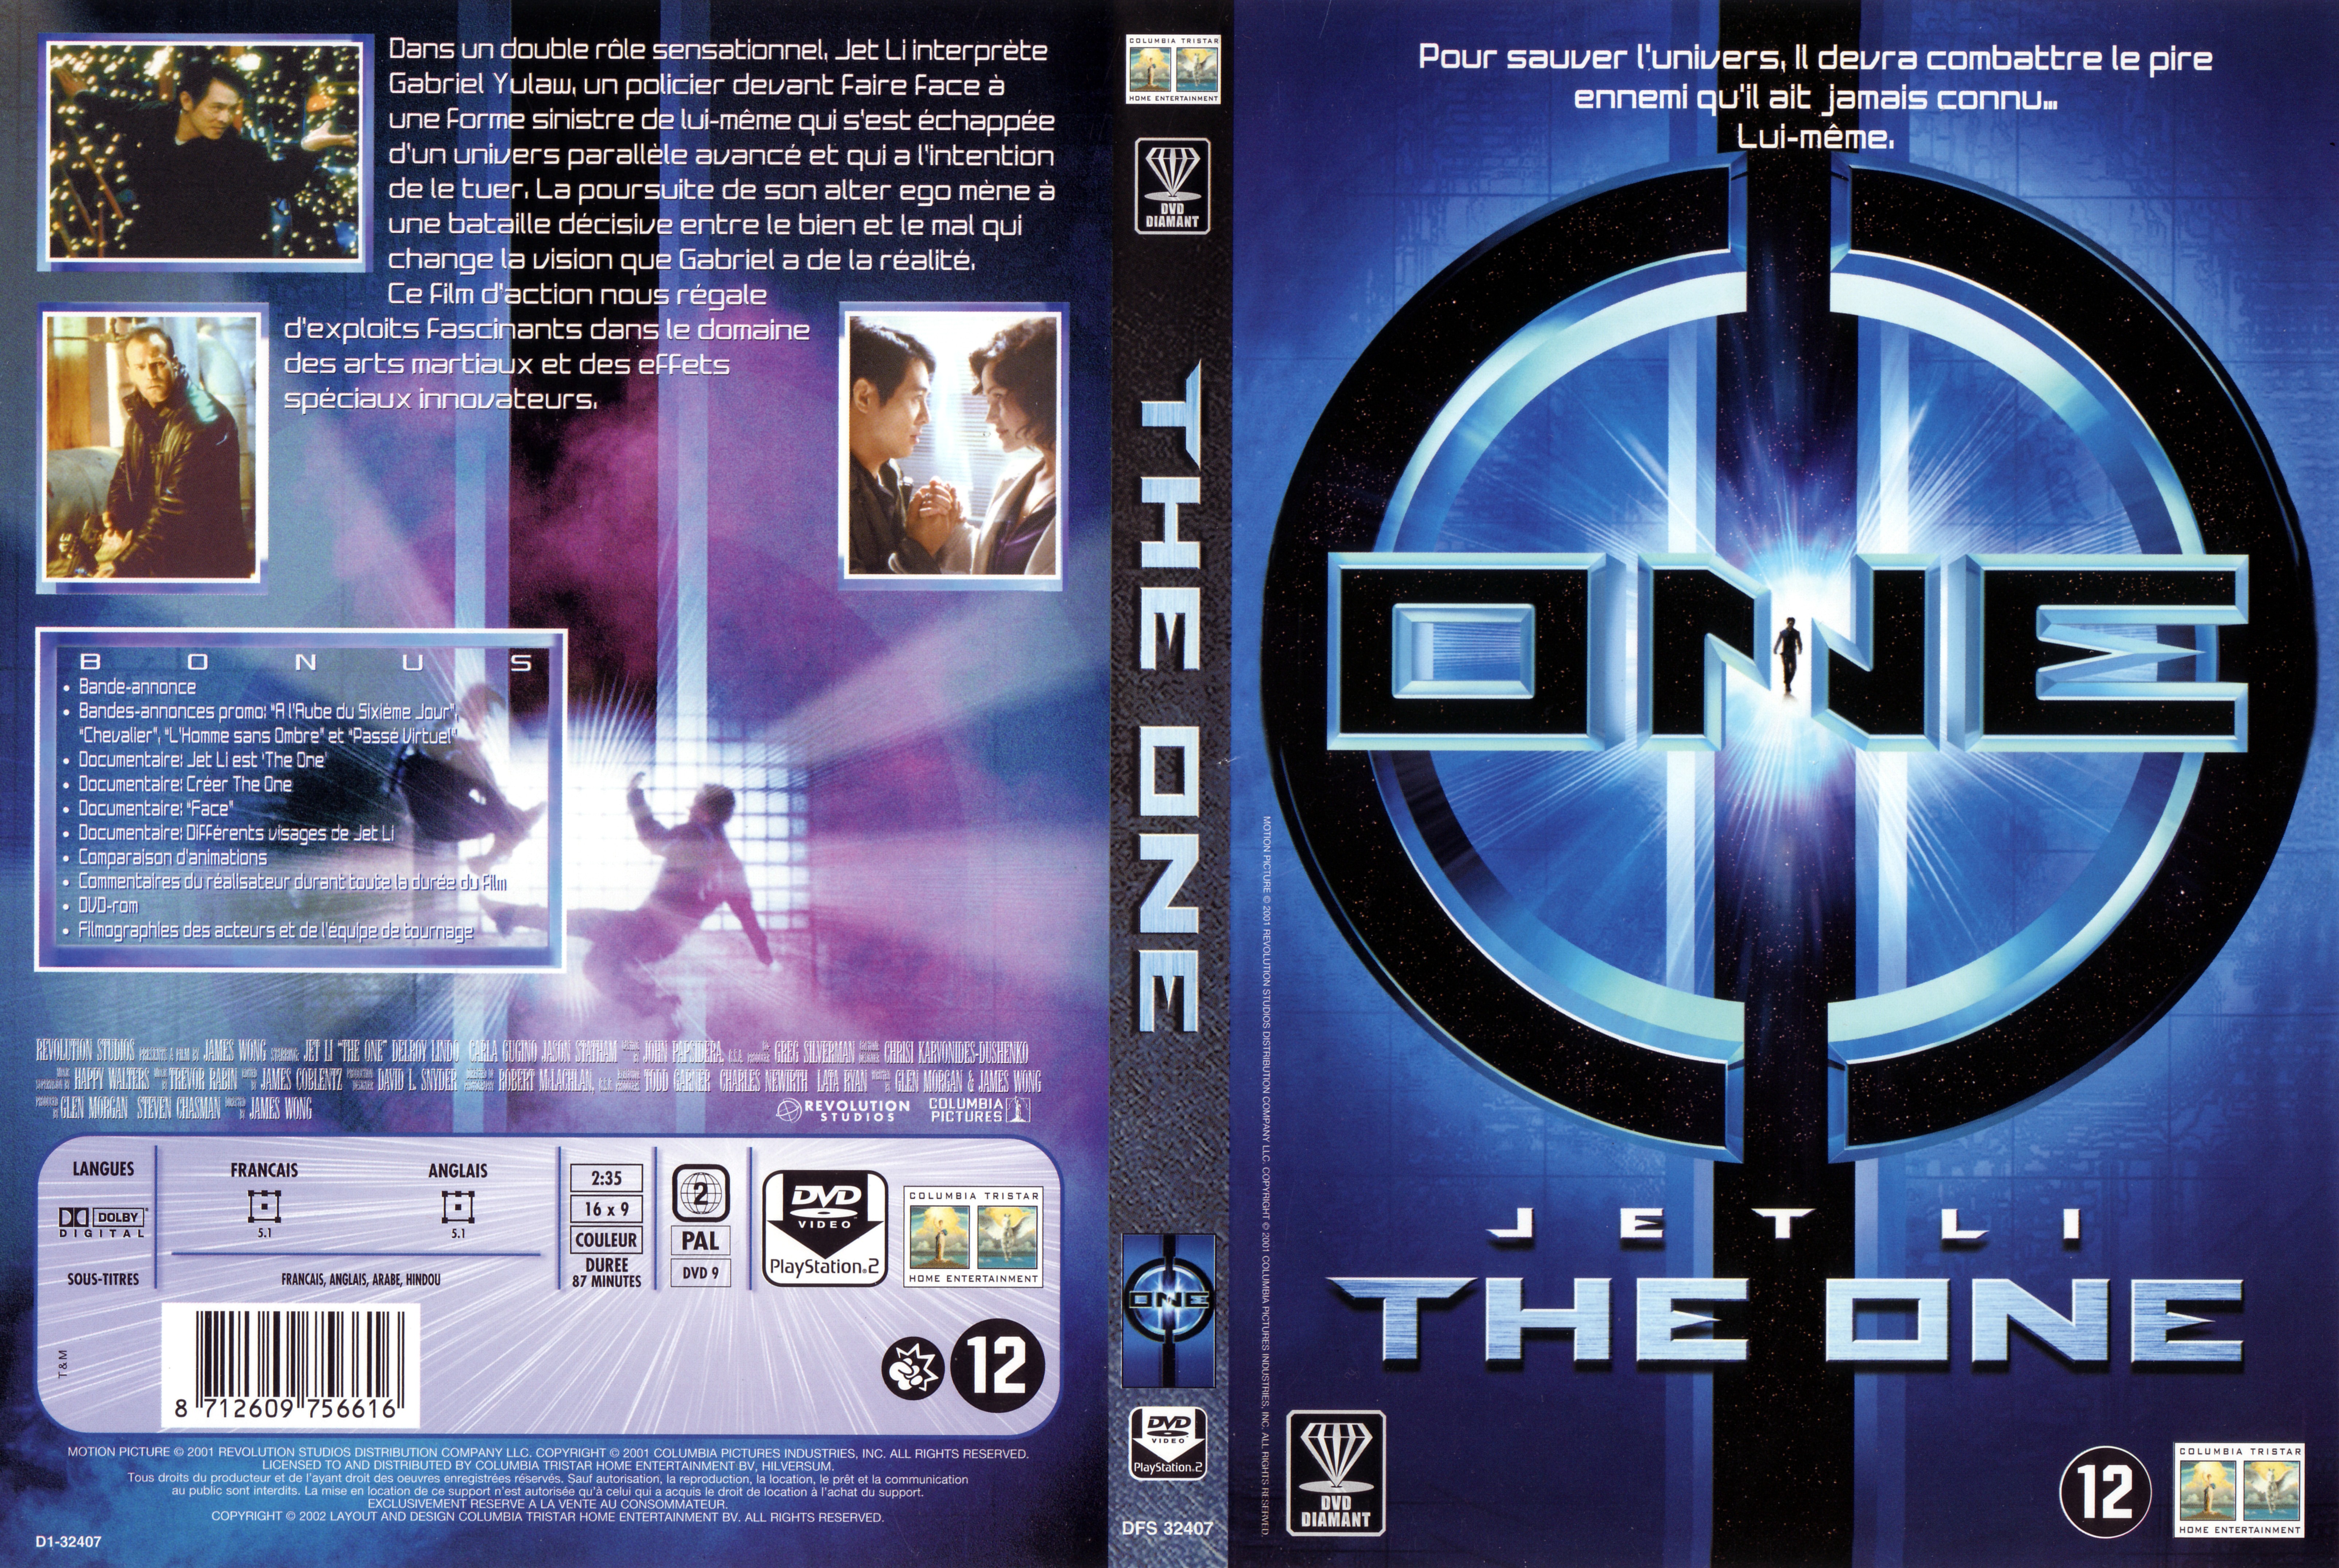 Jaquette DVD The one v2